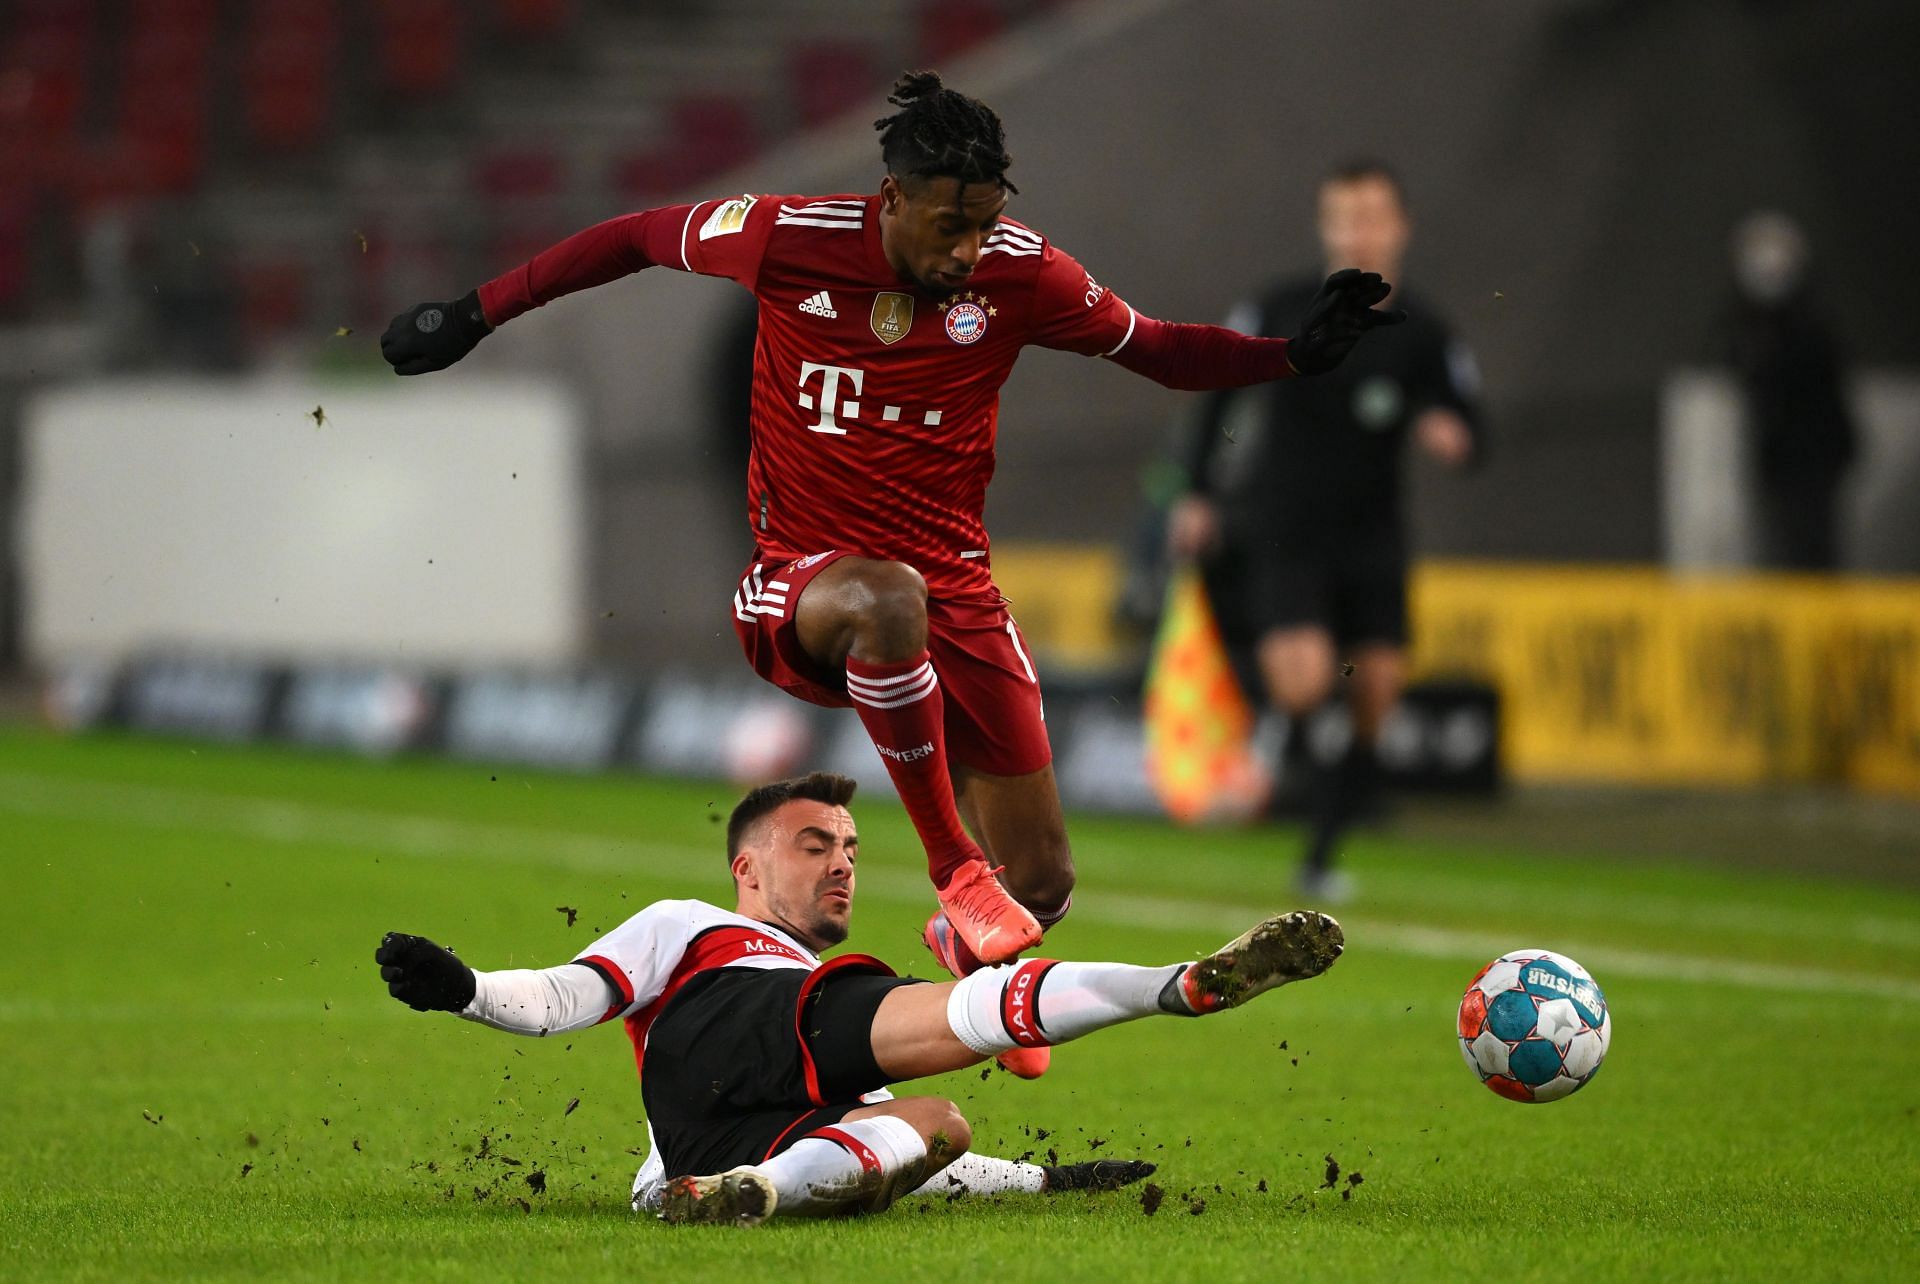 Kingsley Coman pulled his hamstring, and was taken off the field in the first half.